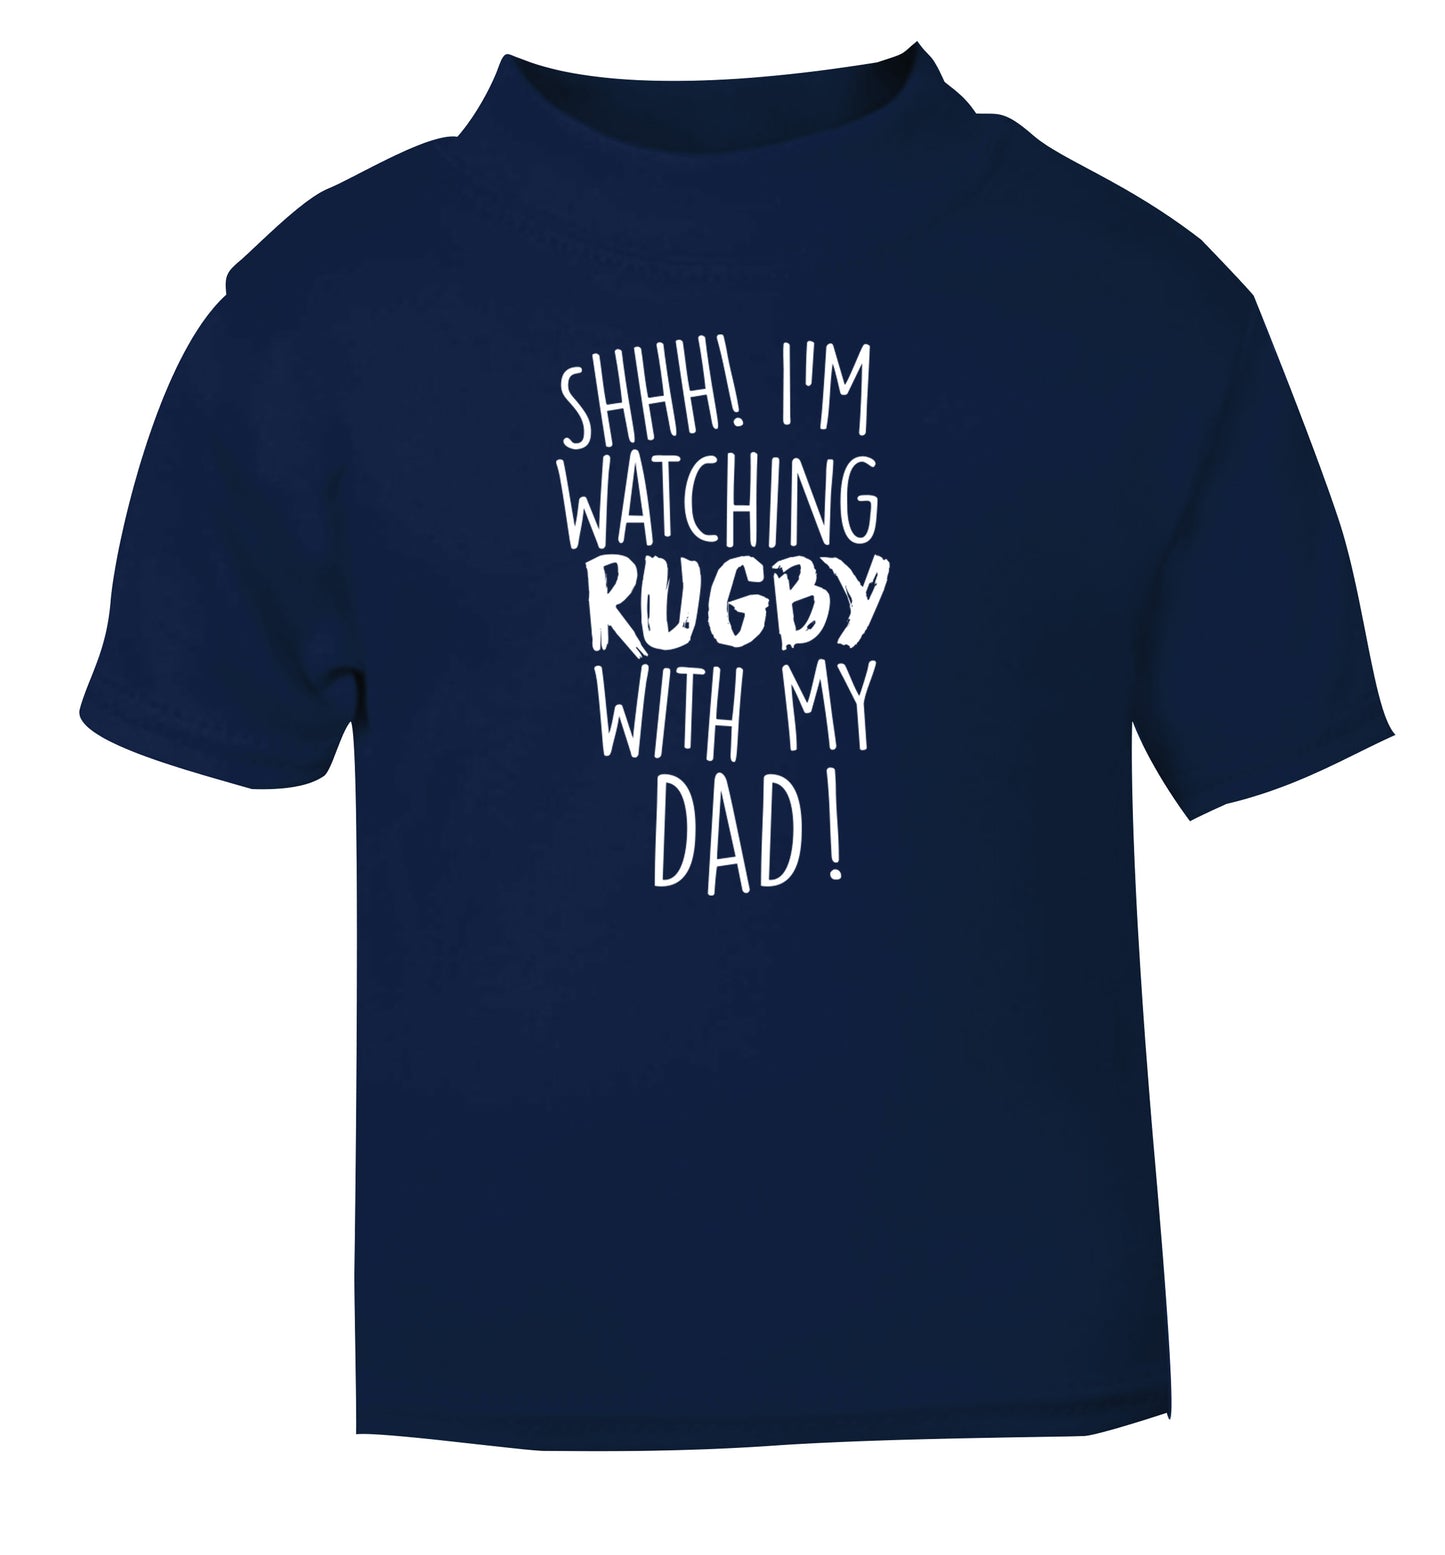 Shh... I'm watching rugby with my dad navy Baby Toddler Tshirt 2 Years